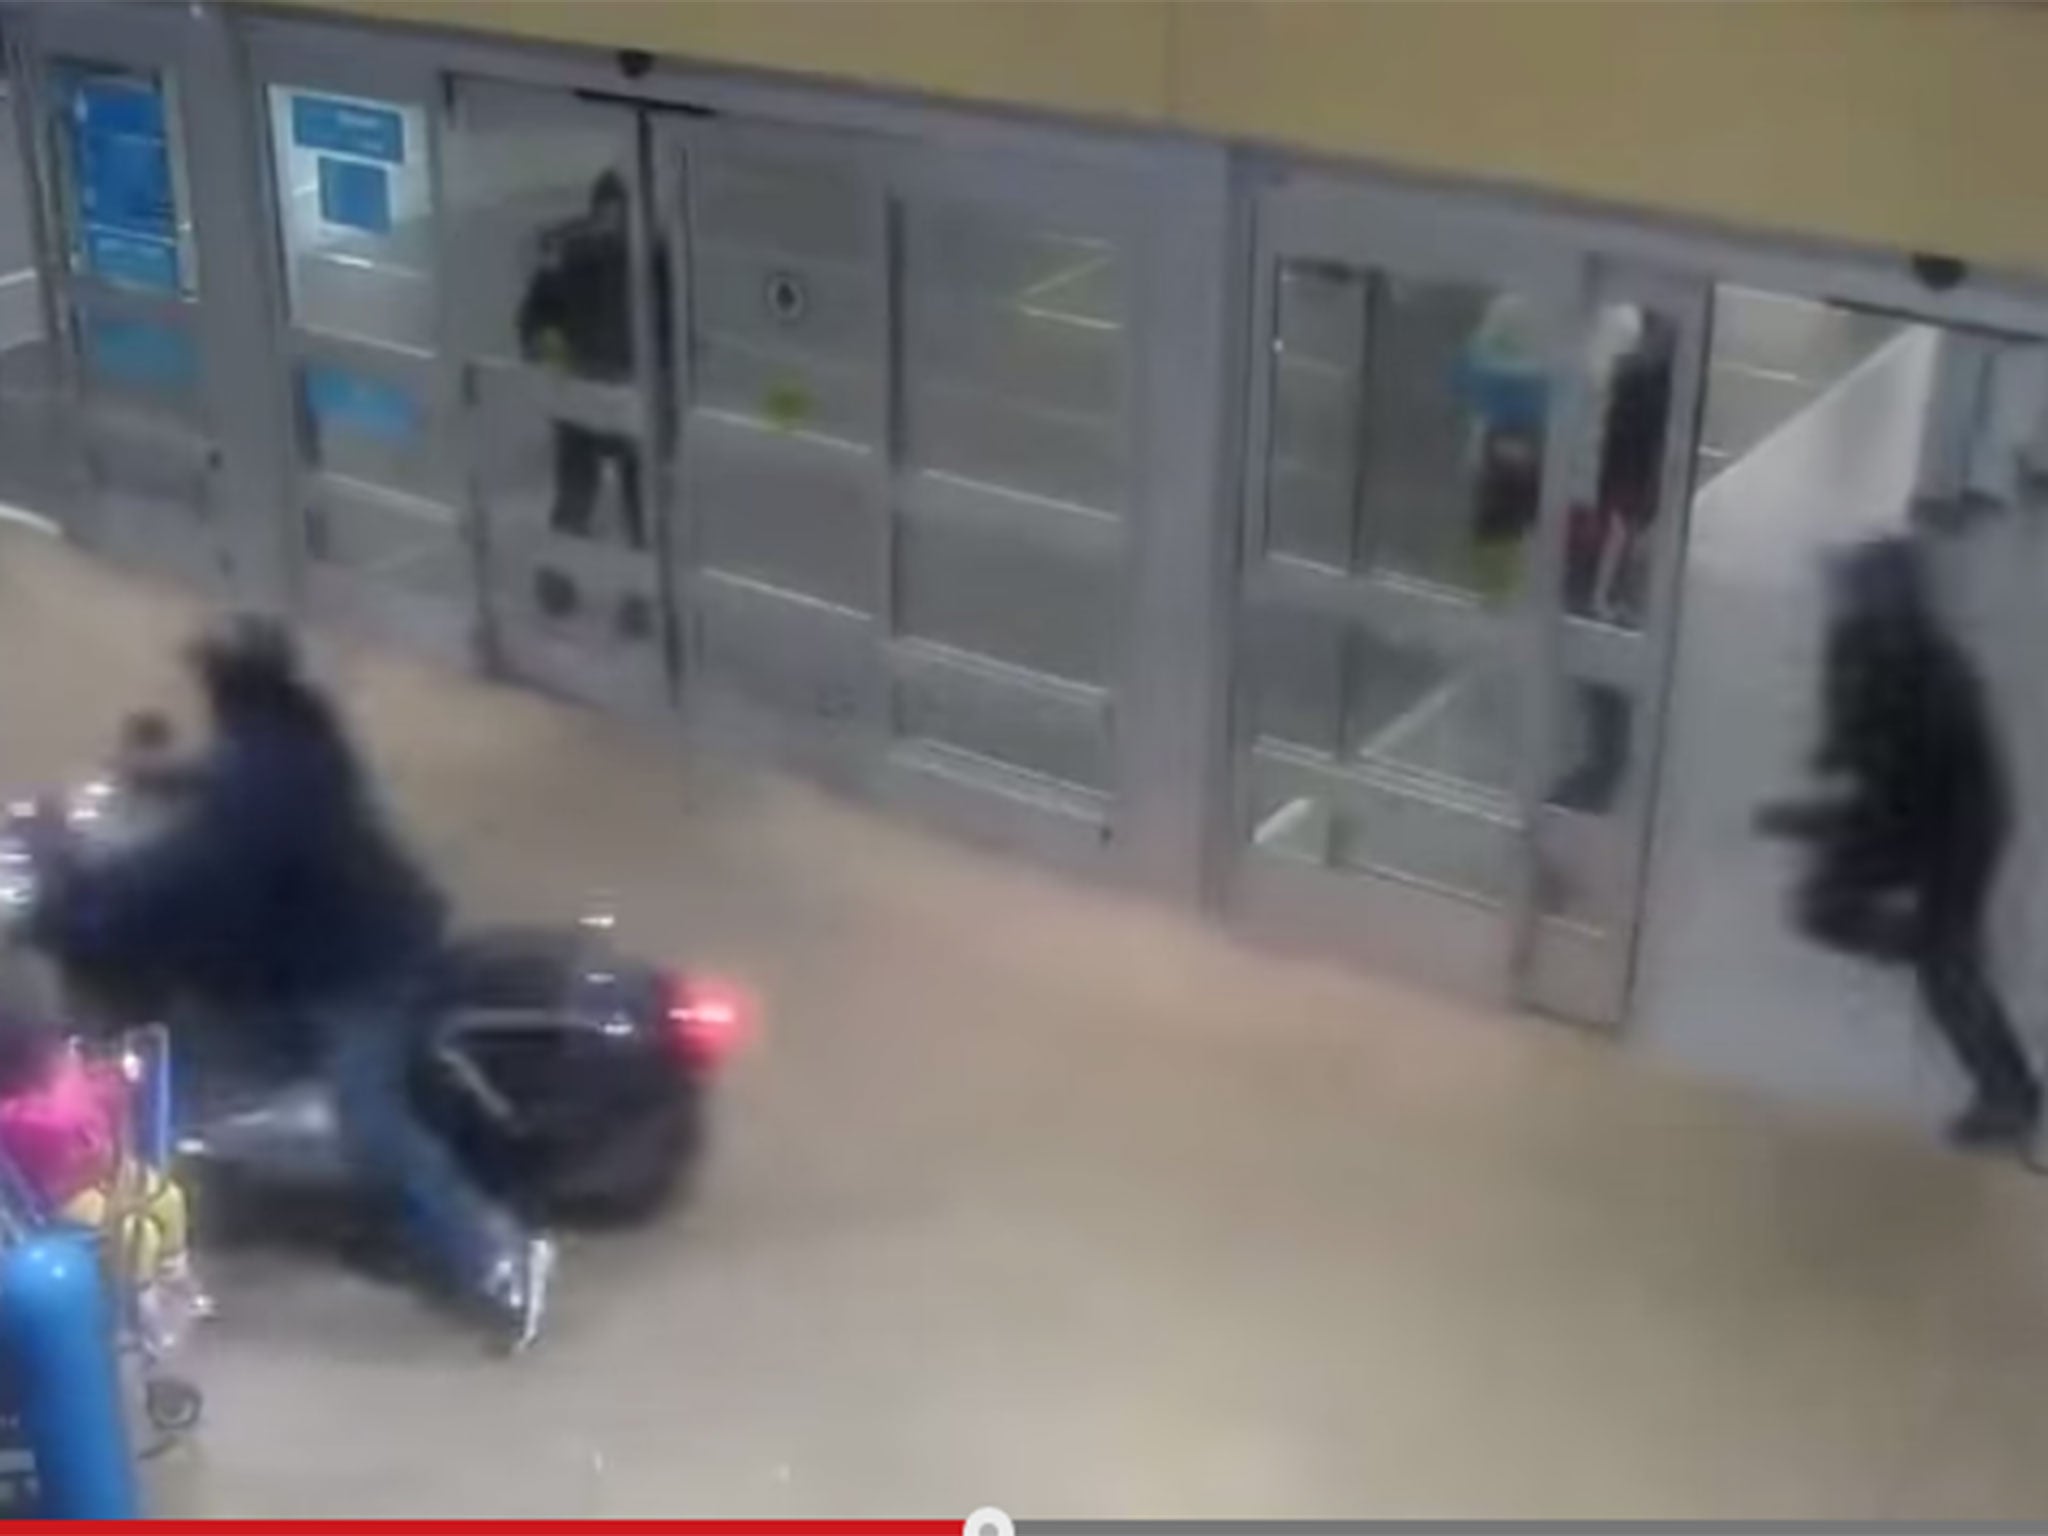 The motorcyclist was pursued on foot through the shopping mall (Royal Canadian Mounted Police)